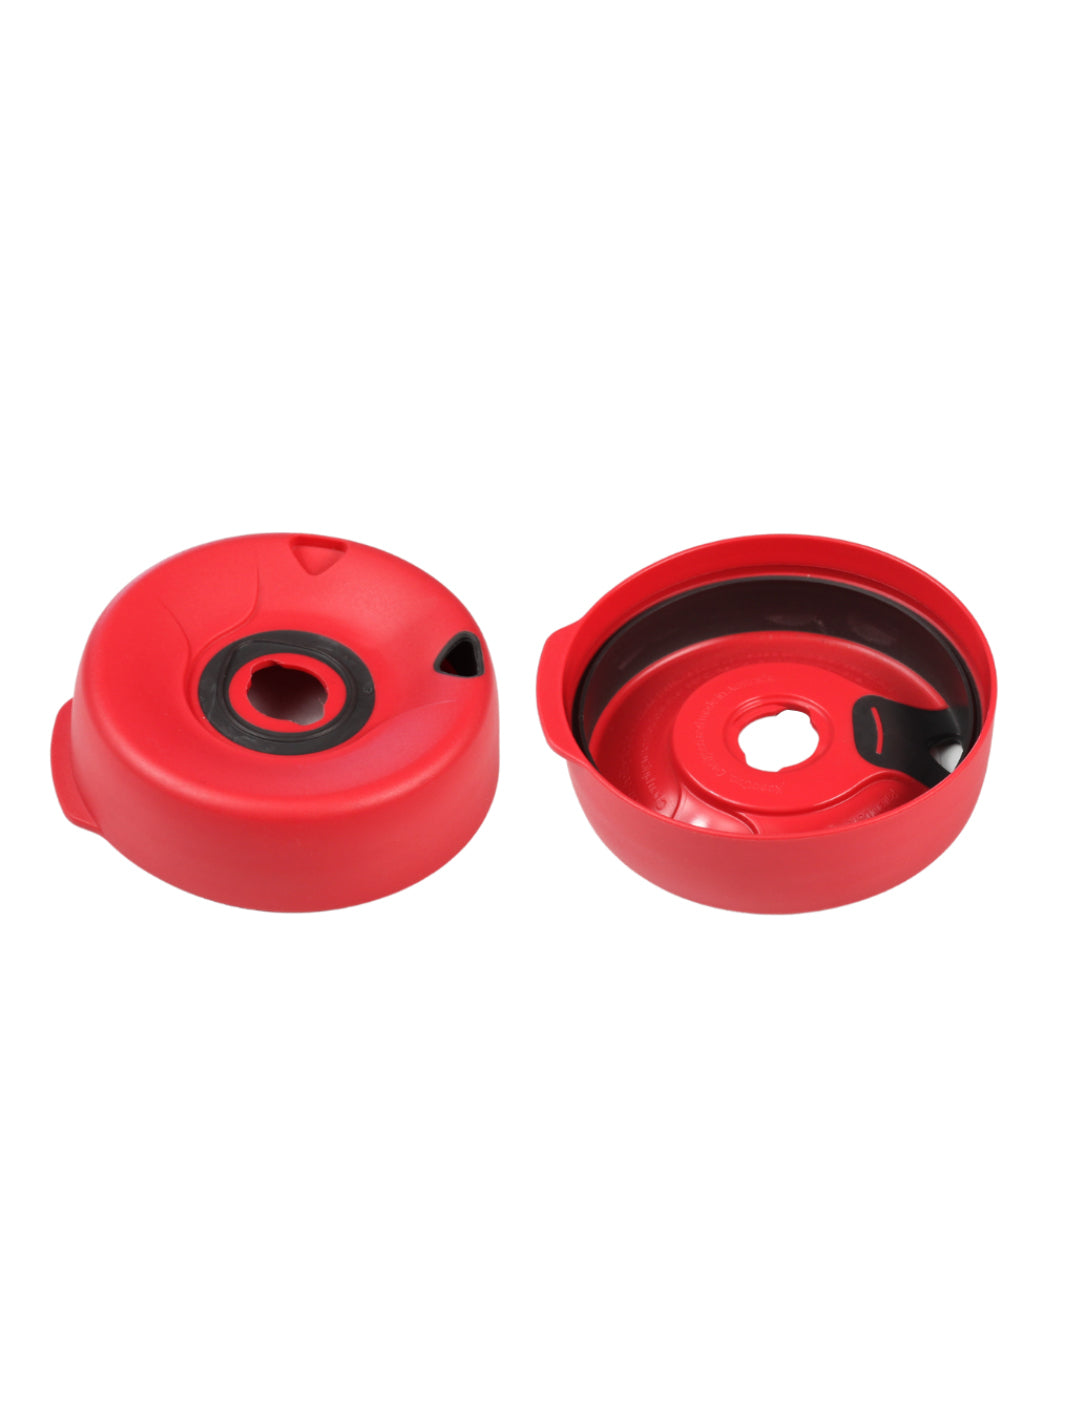 KEEPCUP Replacement Press Fit Lid / Parts